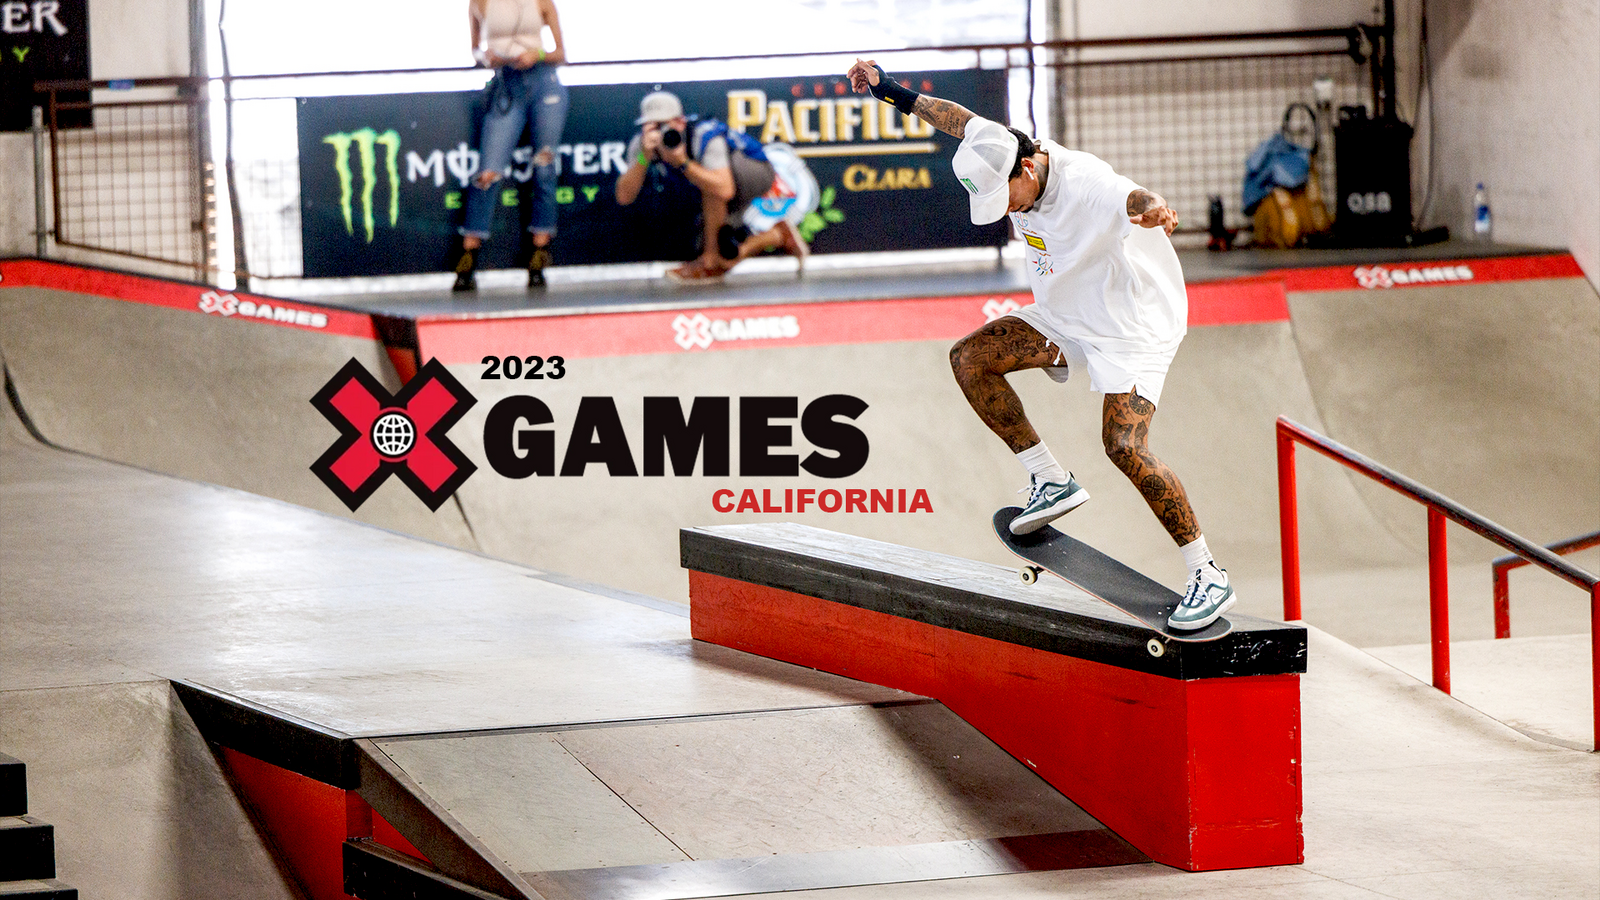 X Games 2023 has returned to Southern California with Finals